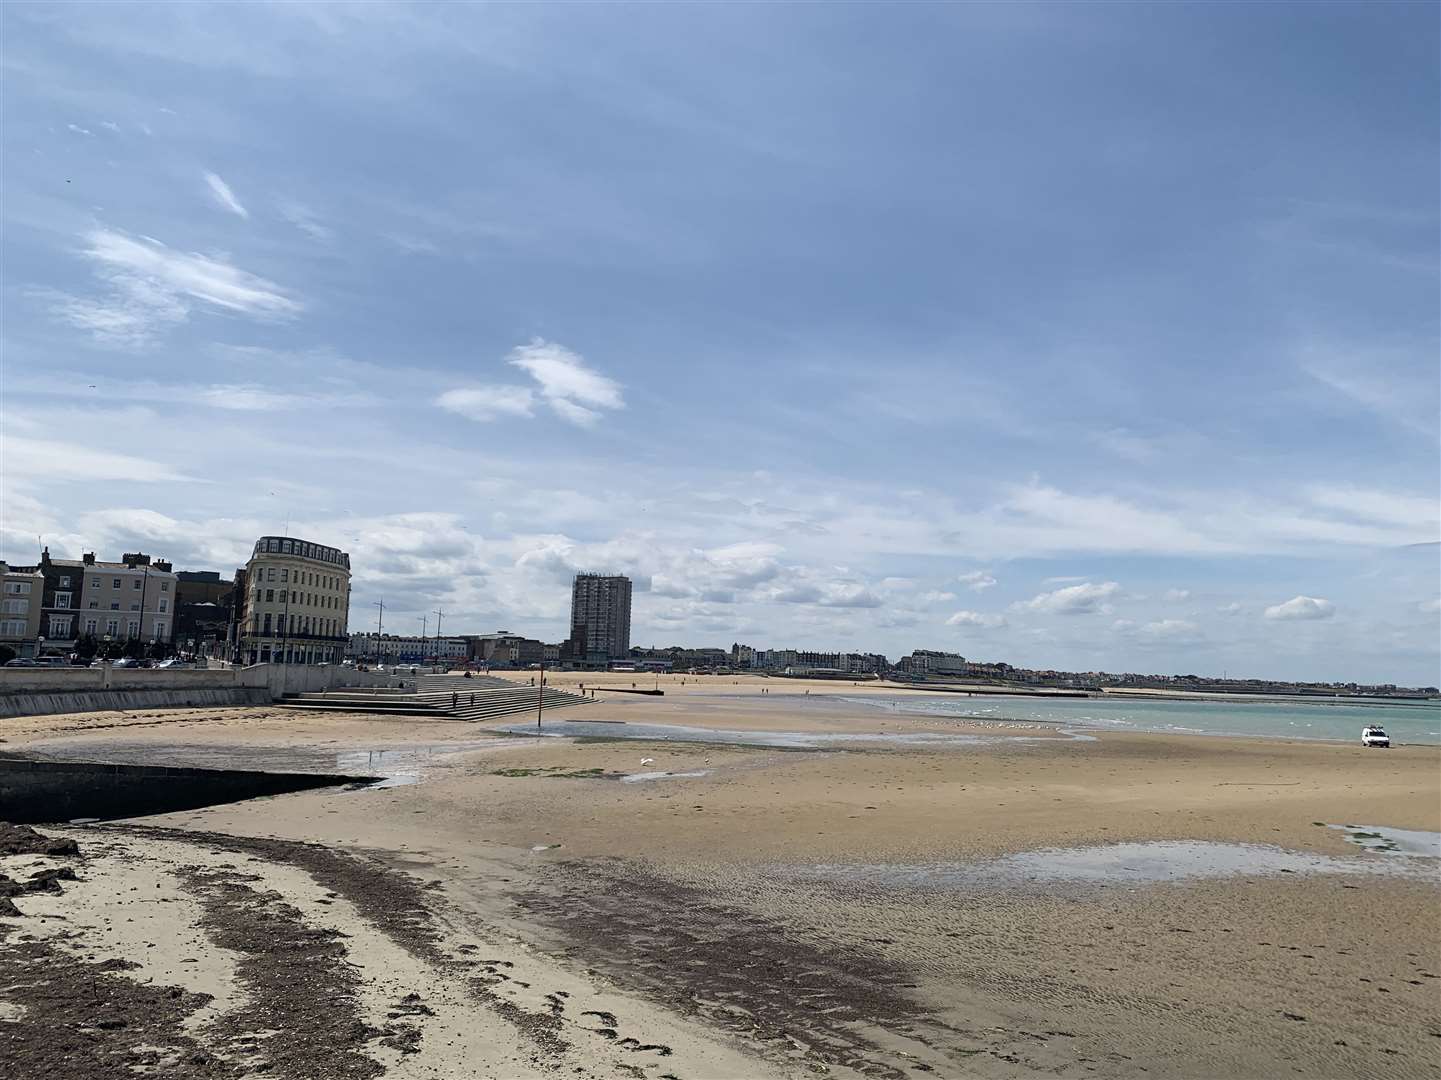 Margate's beach rarely looks this empty